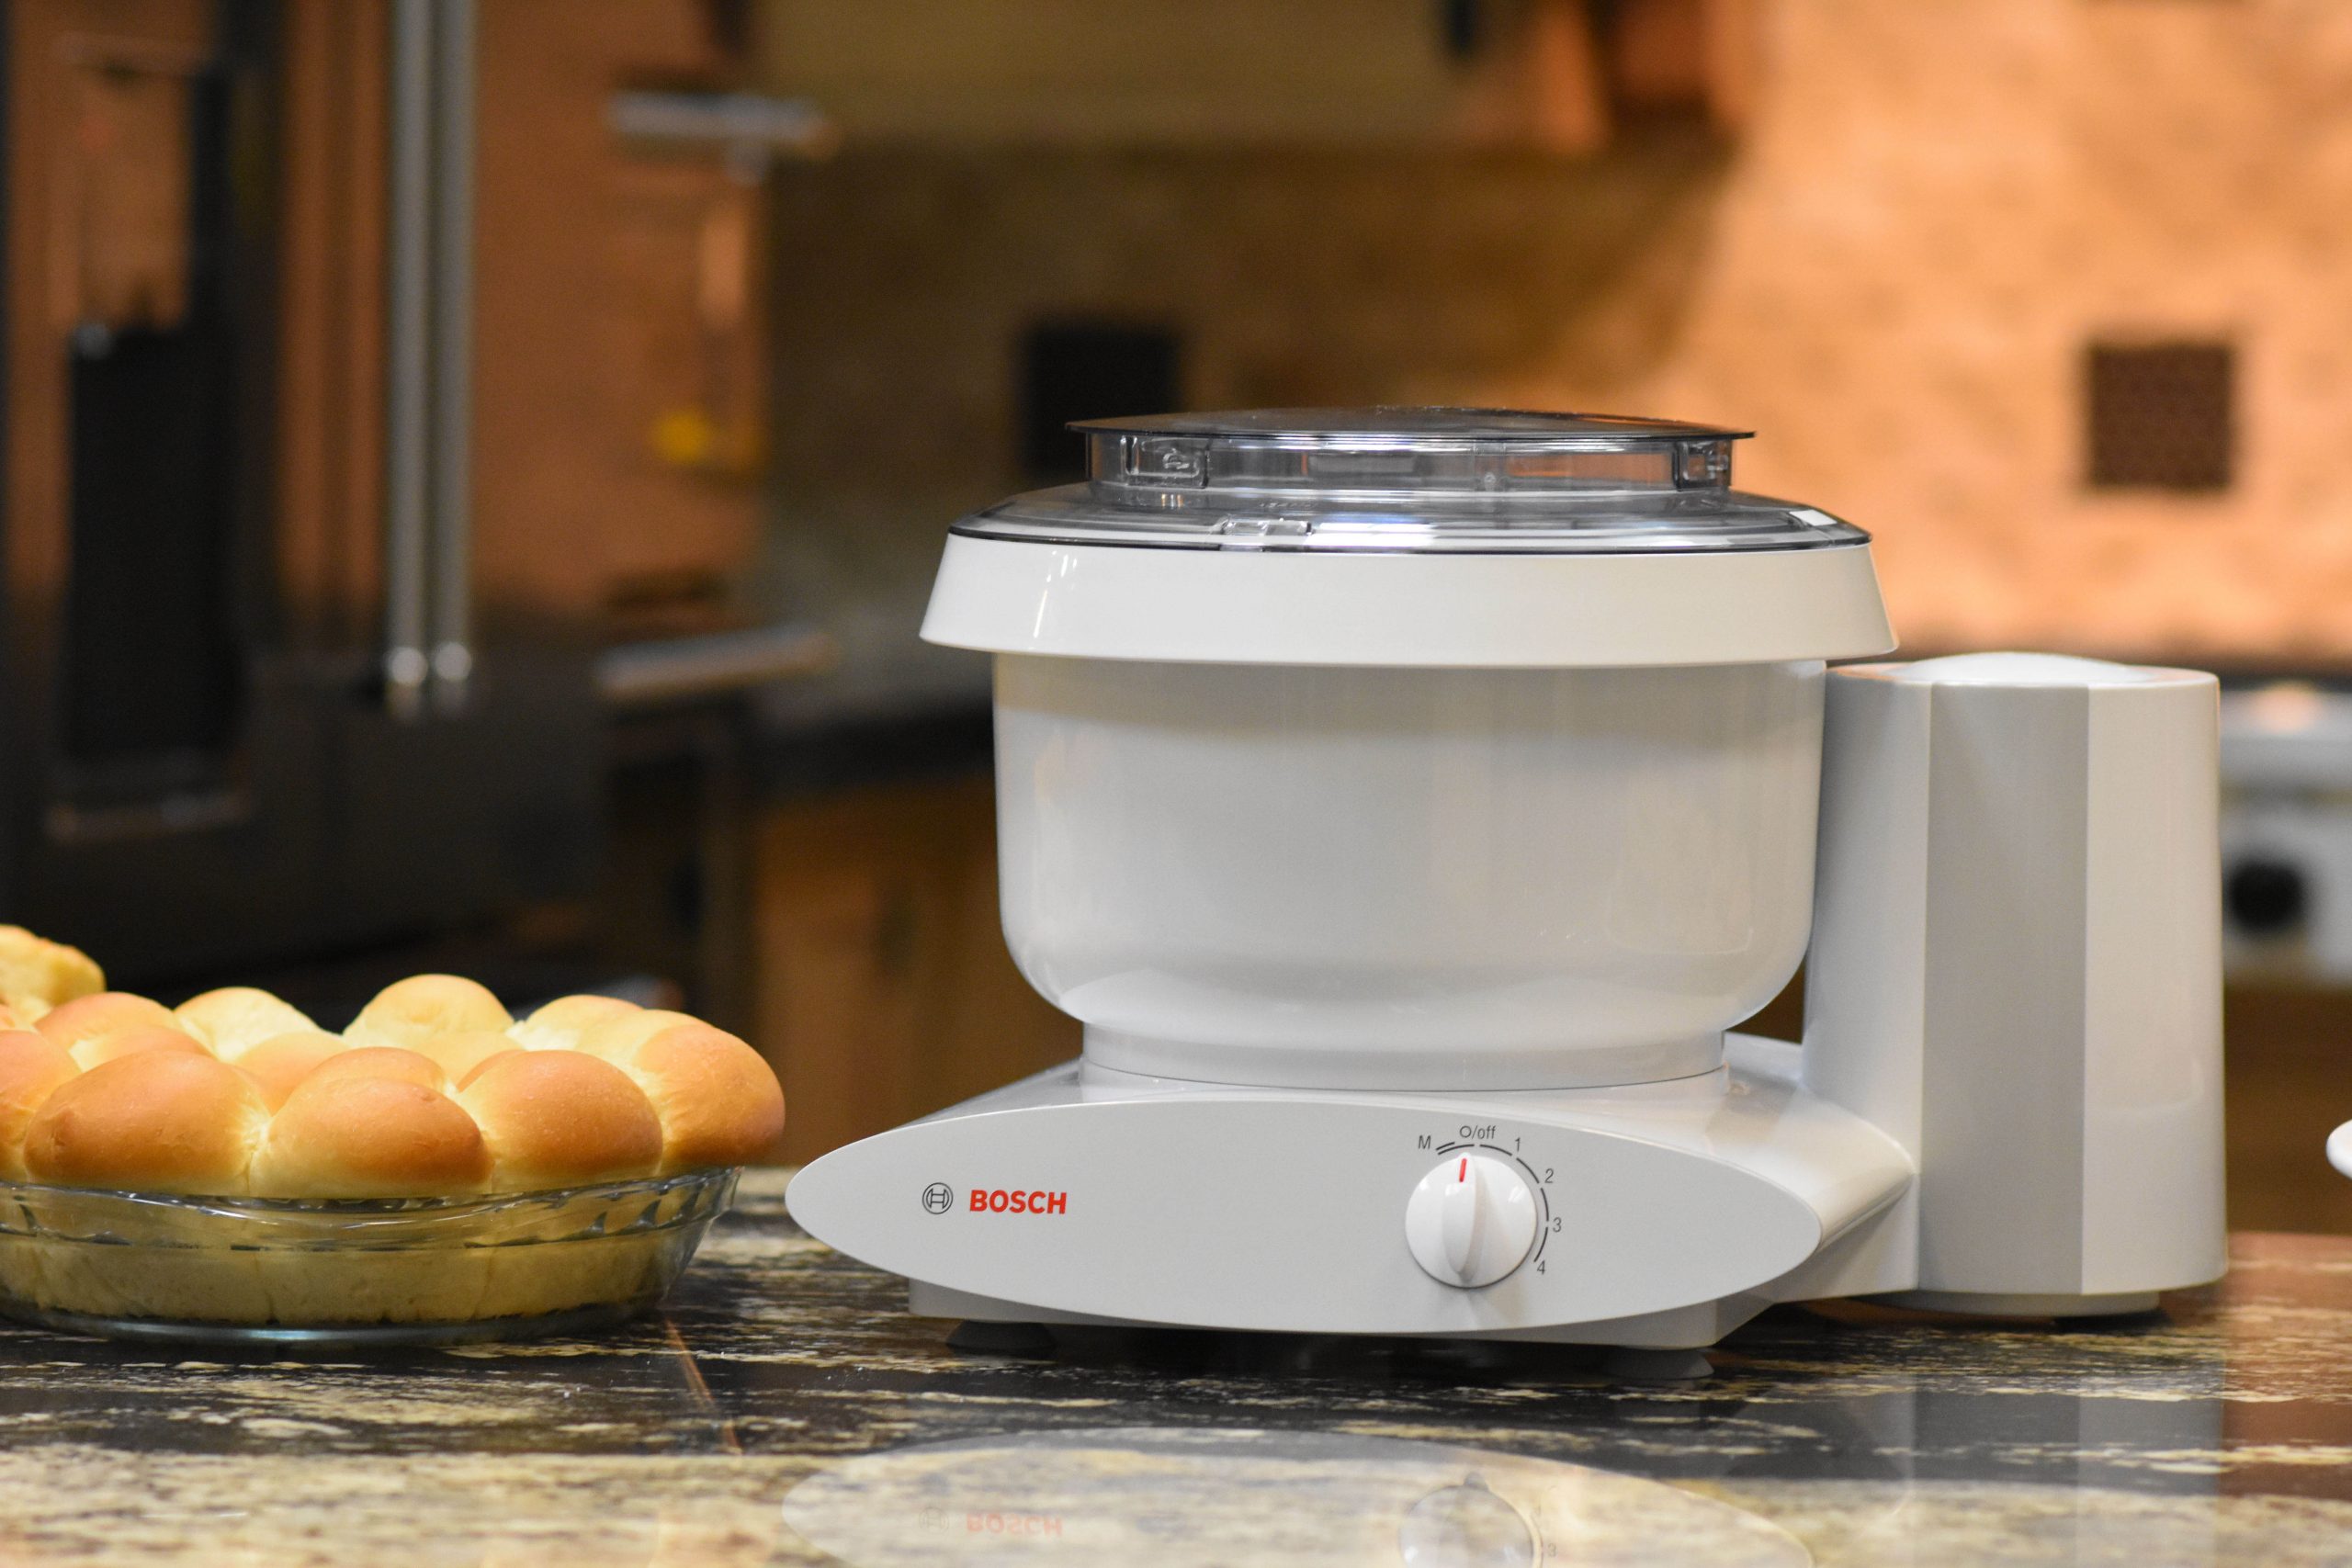 One of our favorite Bosch mixer features is being able to easily